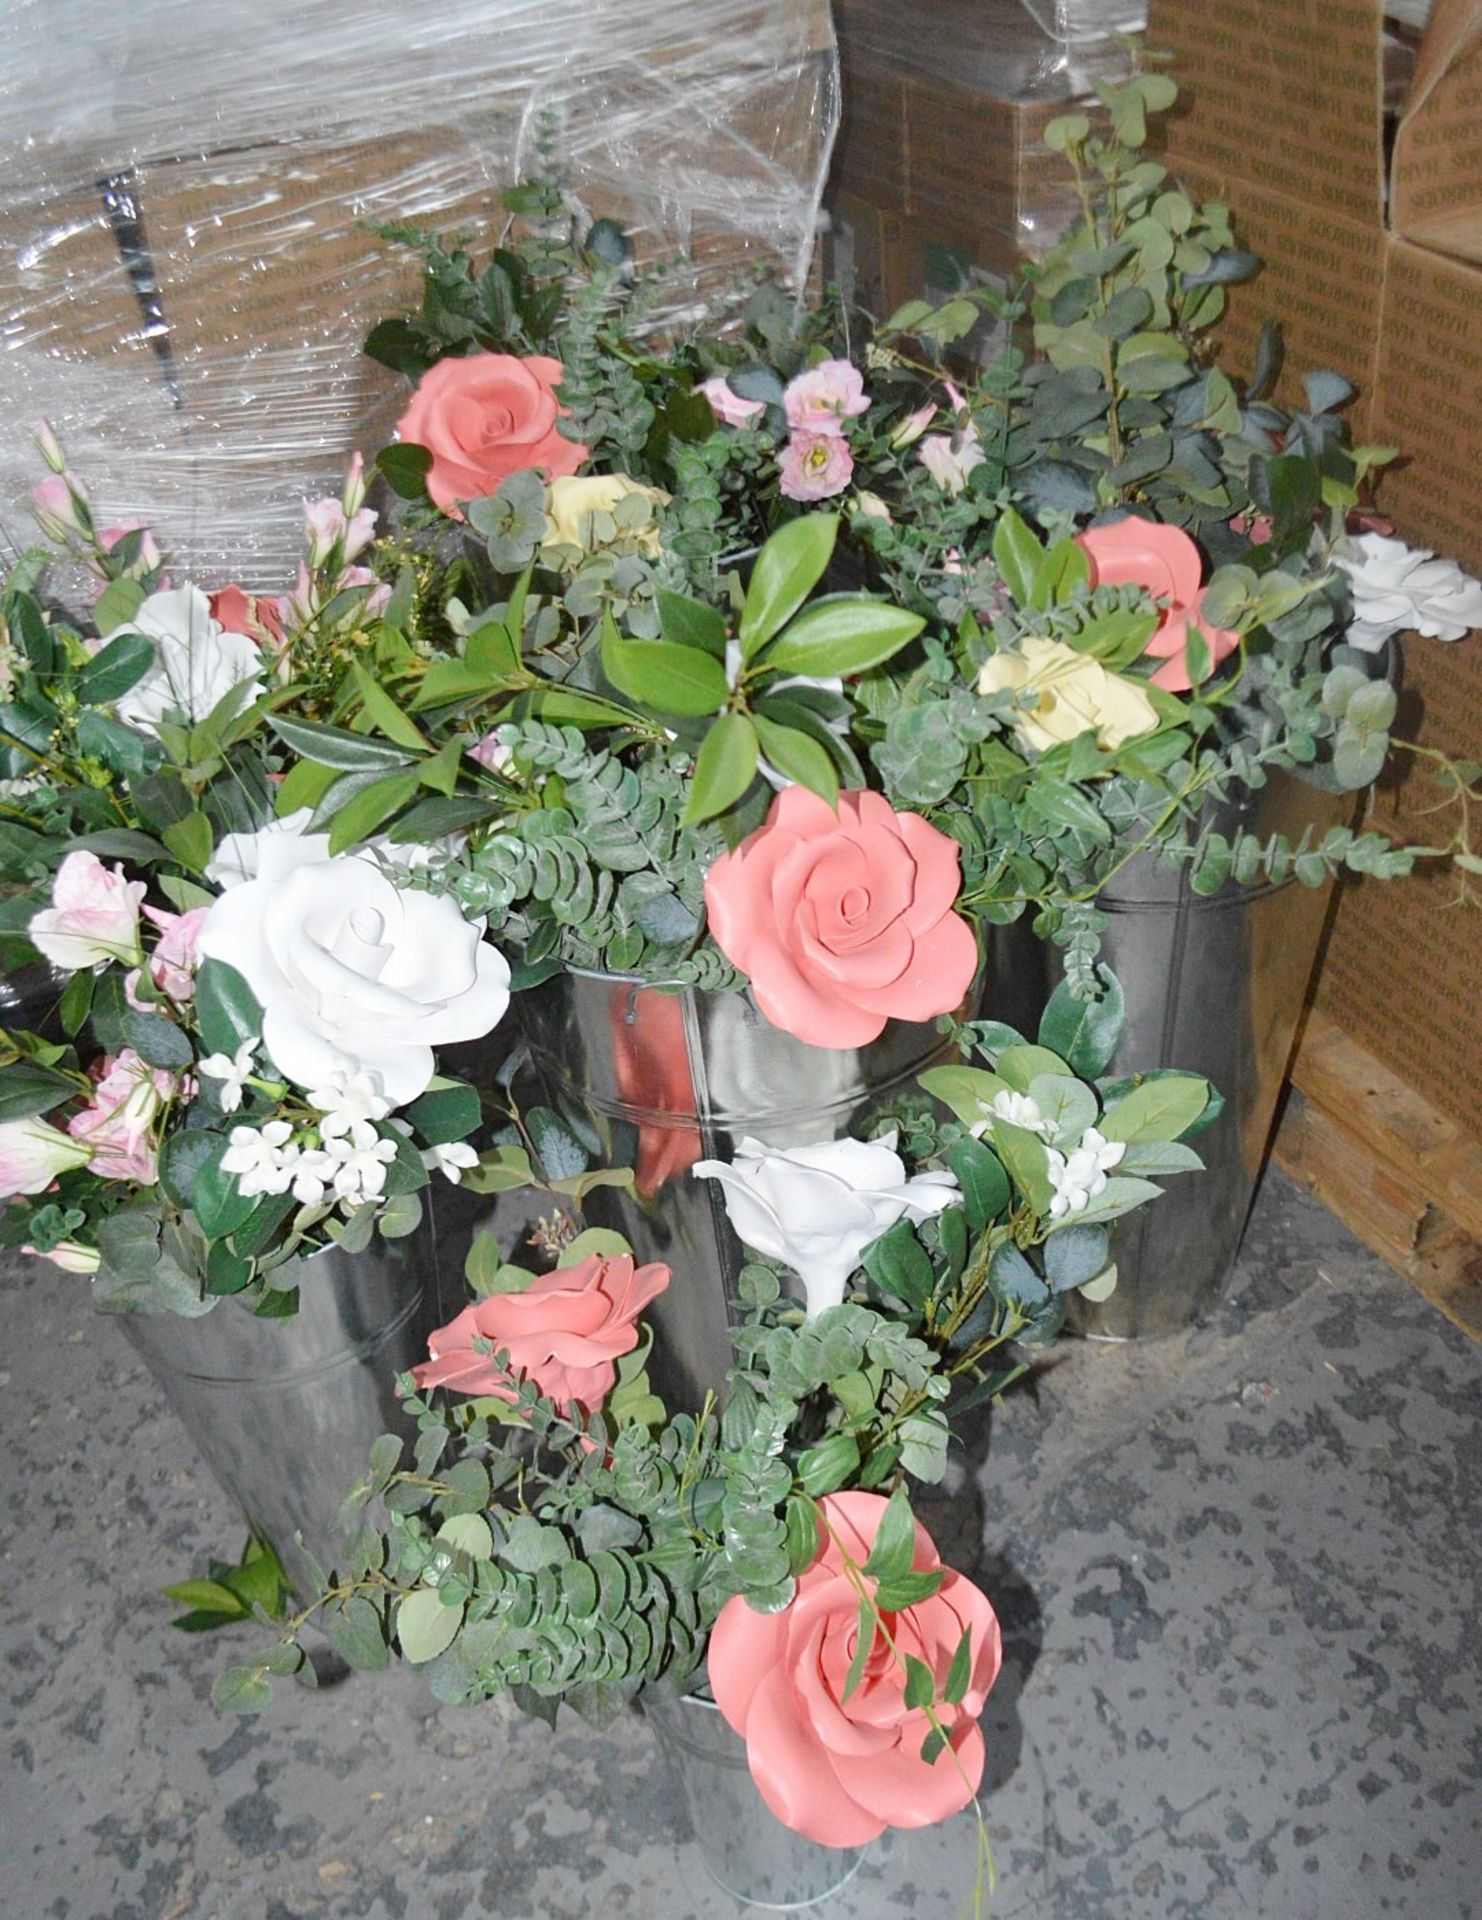 6 x Stunning Commercial Floral Display Bouquets Featuring Handmade Clay Roses and Silk Sprays - Ref: - Image 12 of 13